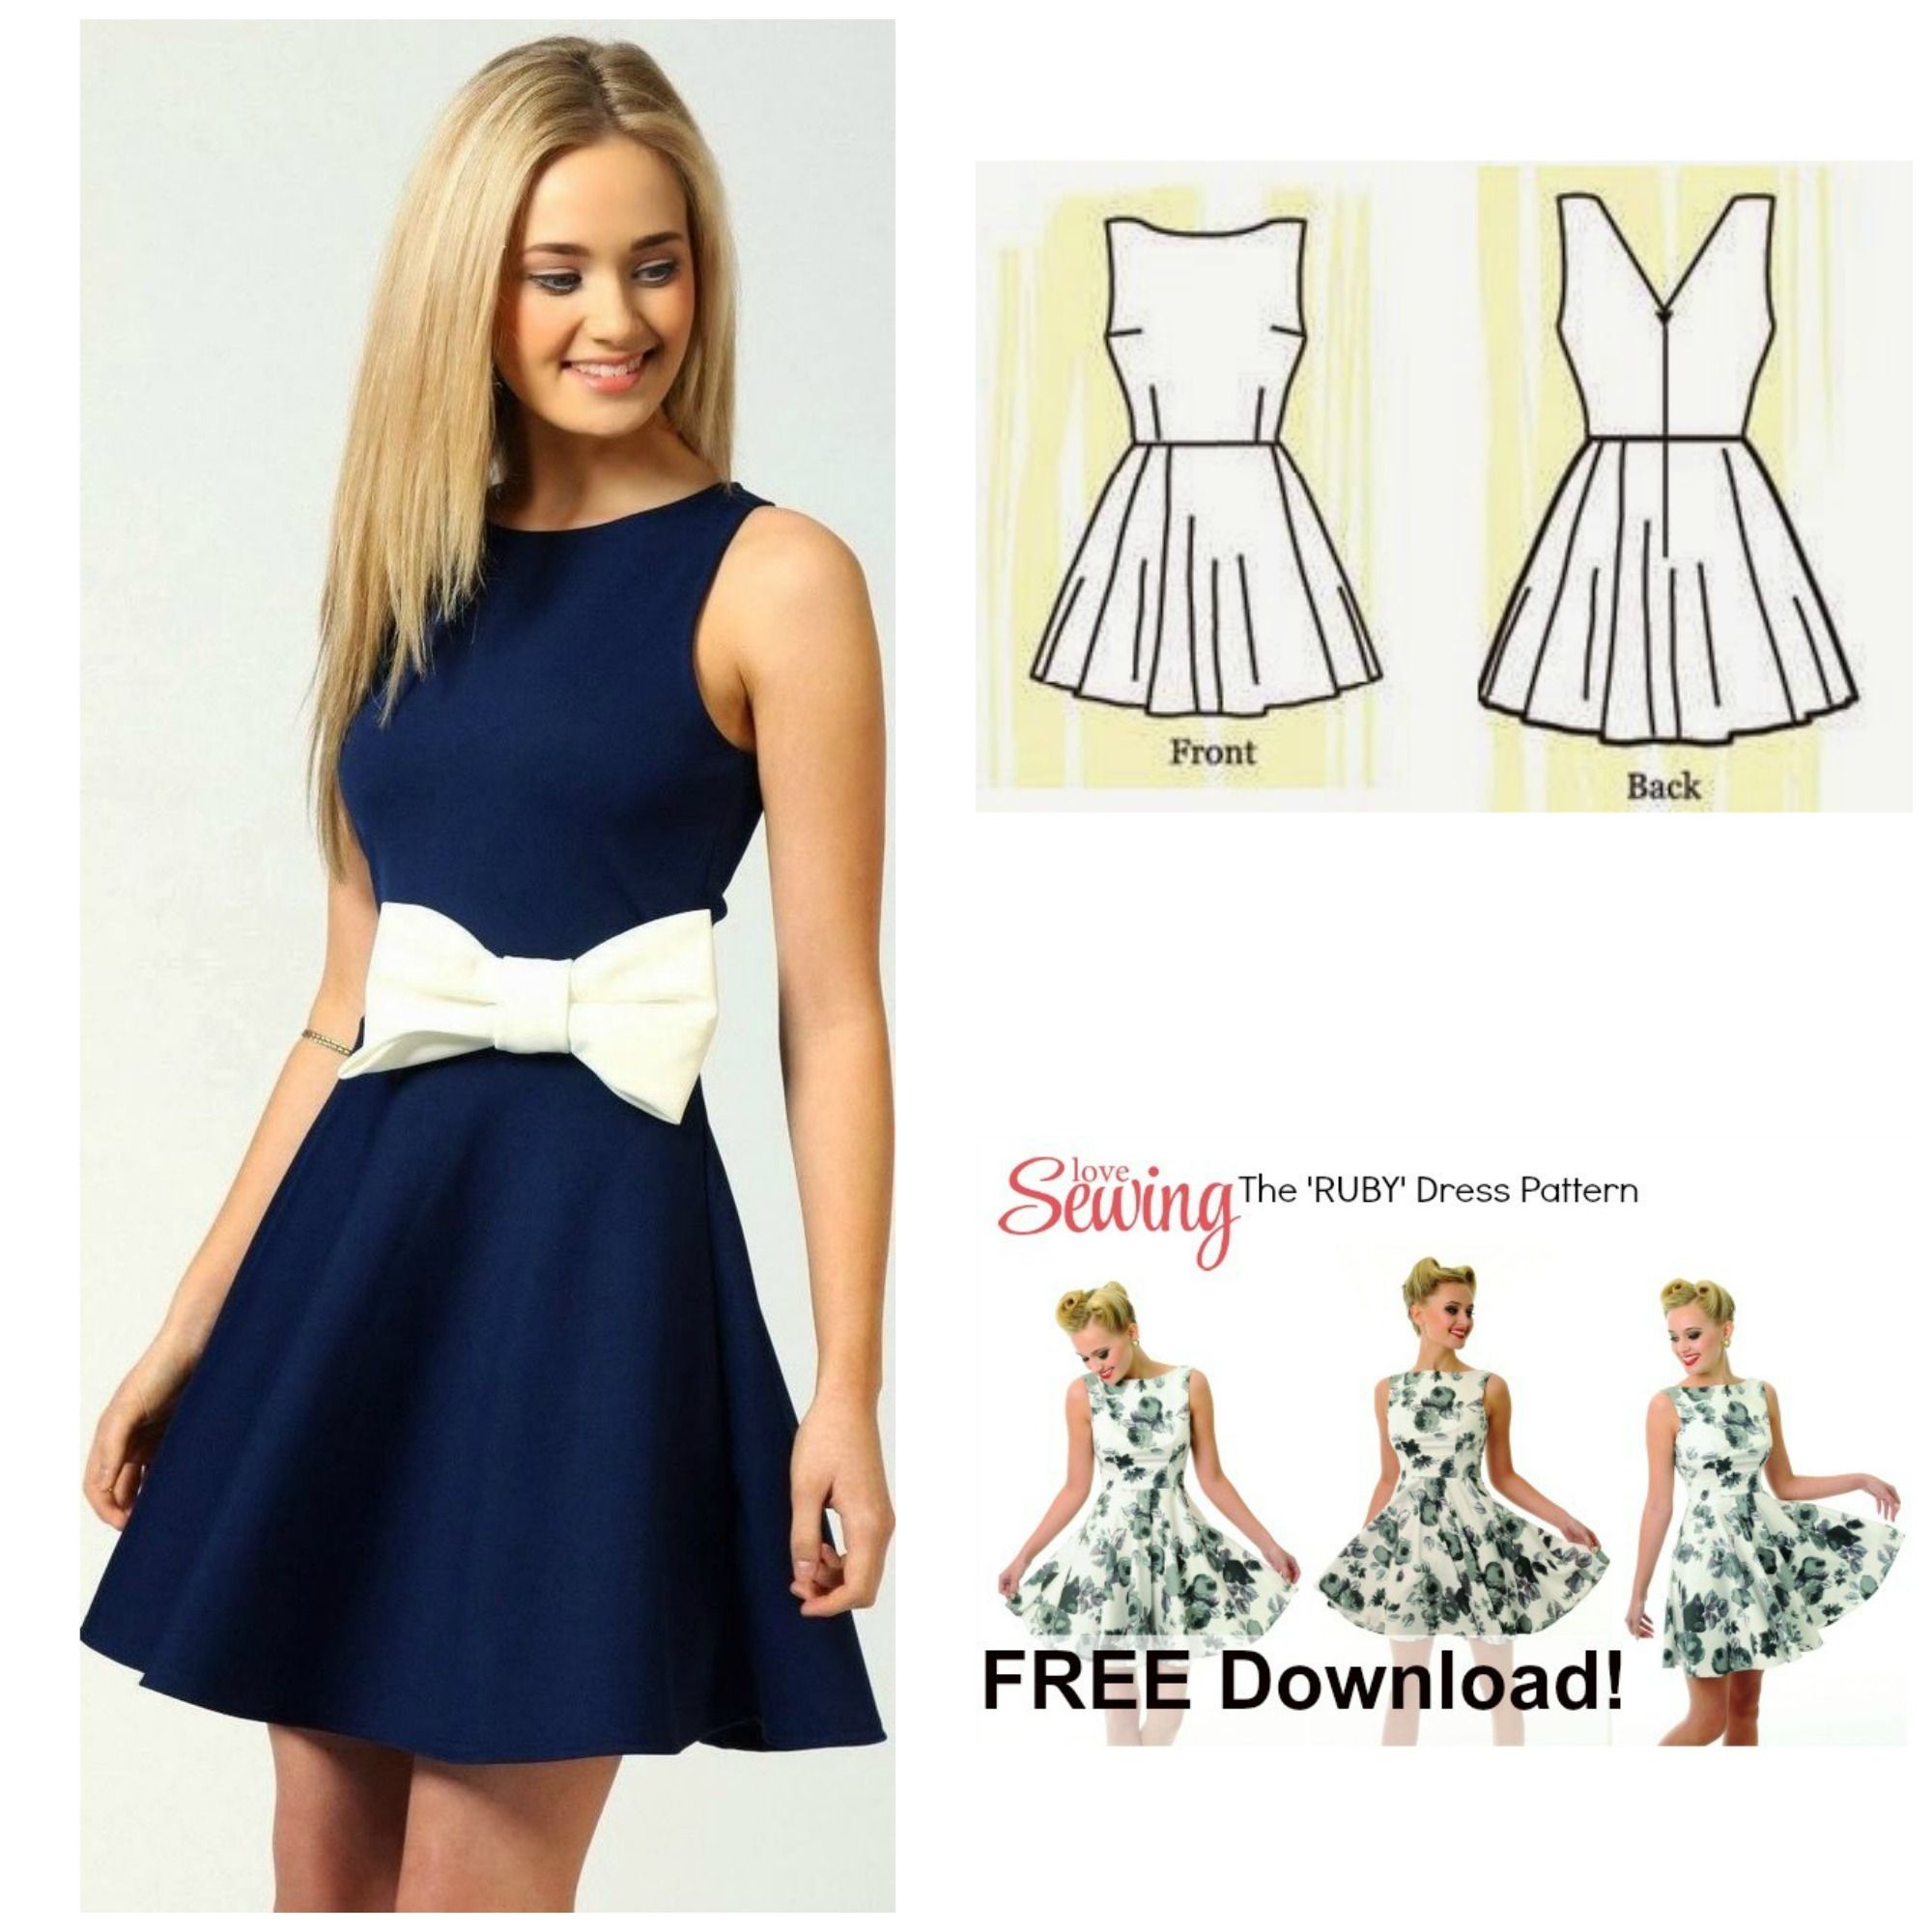 Free sewing patterns for women